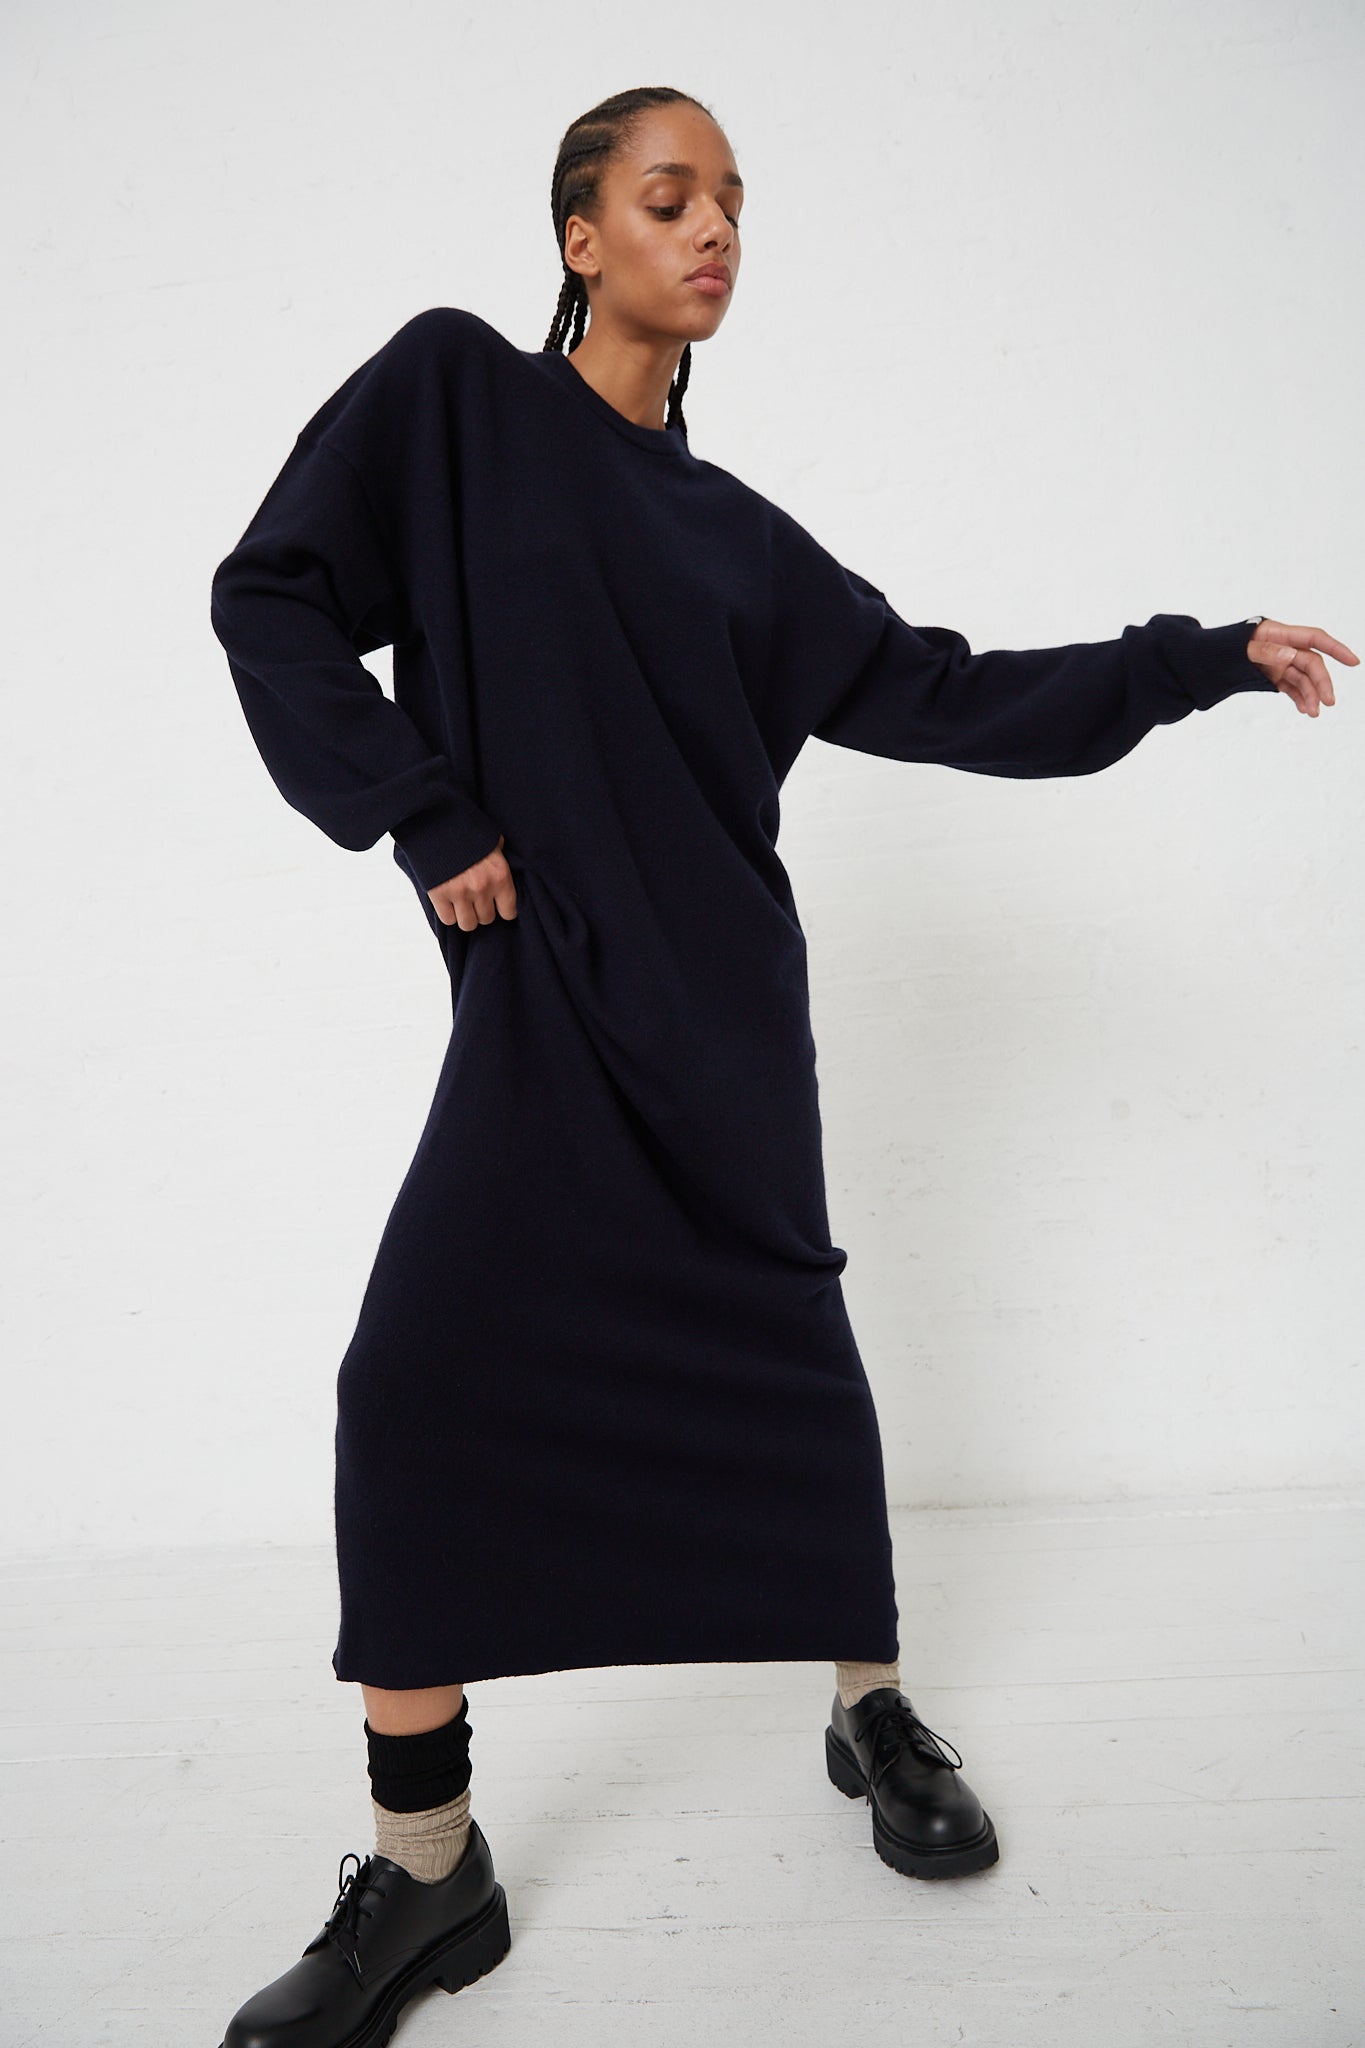 The model is wearing a No. 106 Weird Dress in Navy made of Extreme Cashmere blend fabric.